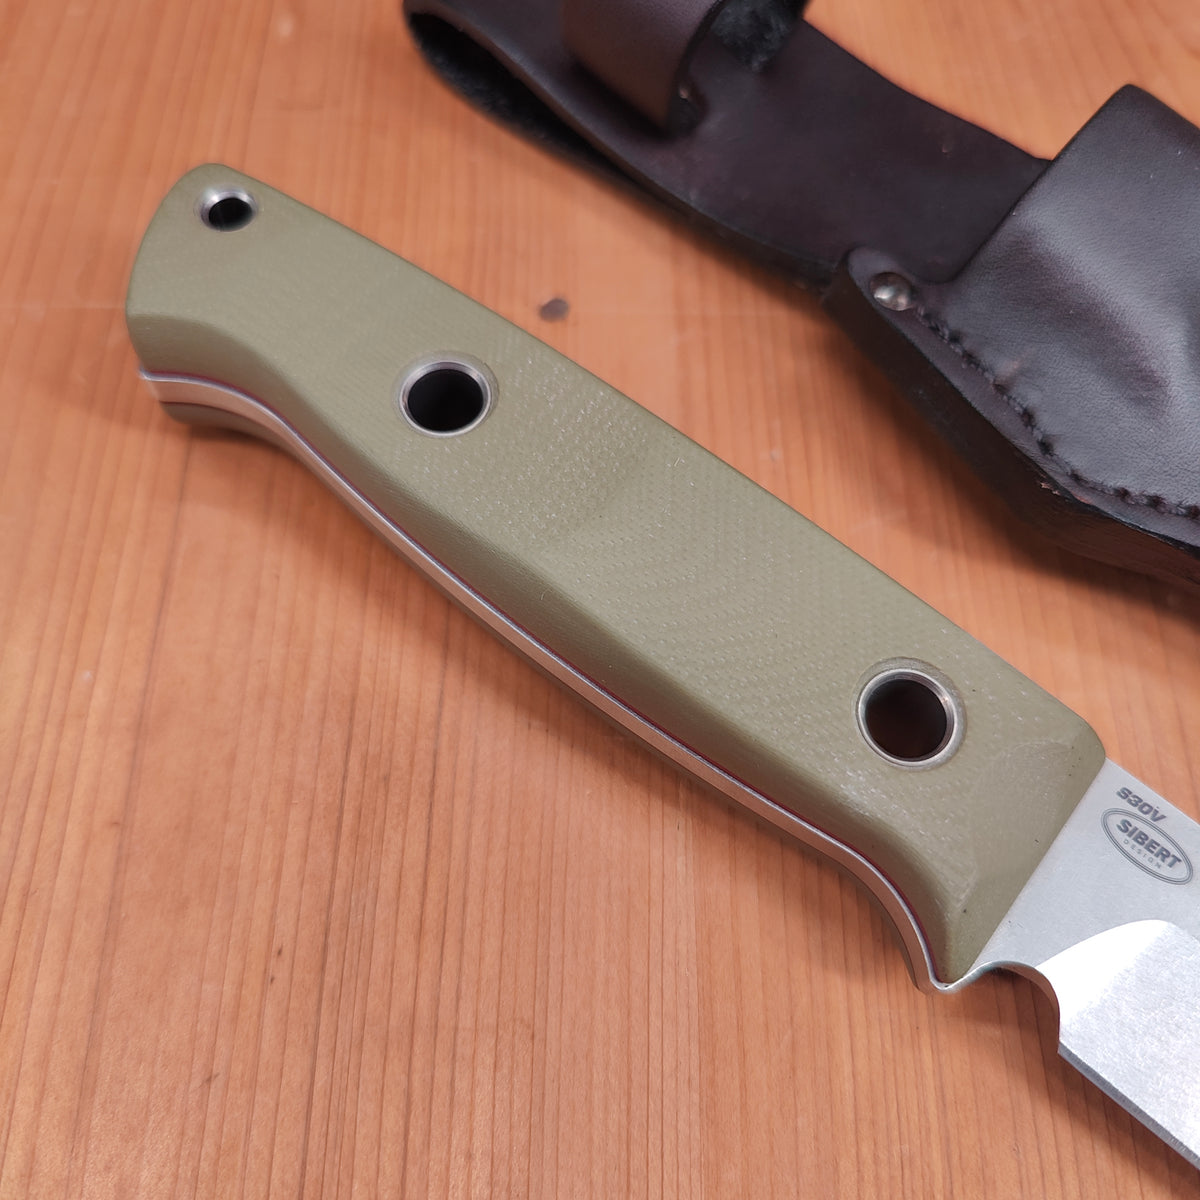 Benchmade 163-1 Bushcrafter 4.3" Drop Point CPM-S30V Fixed Blade OD Green G10 Handle with Leather Sheath